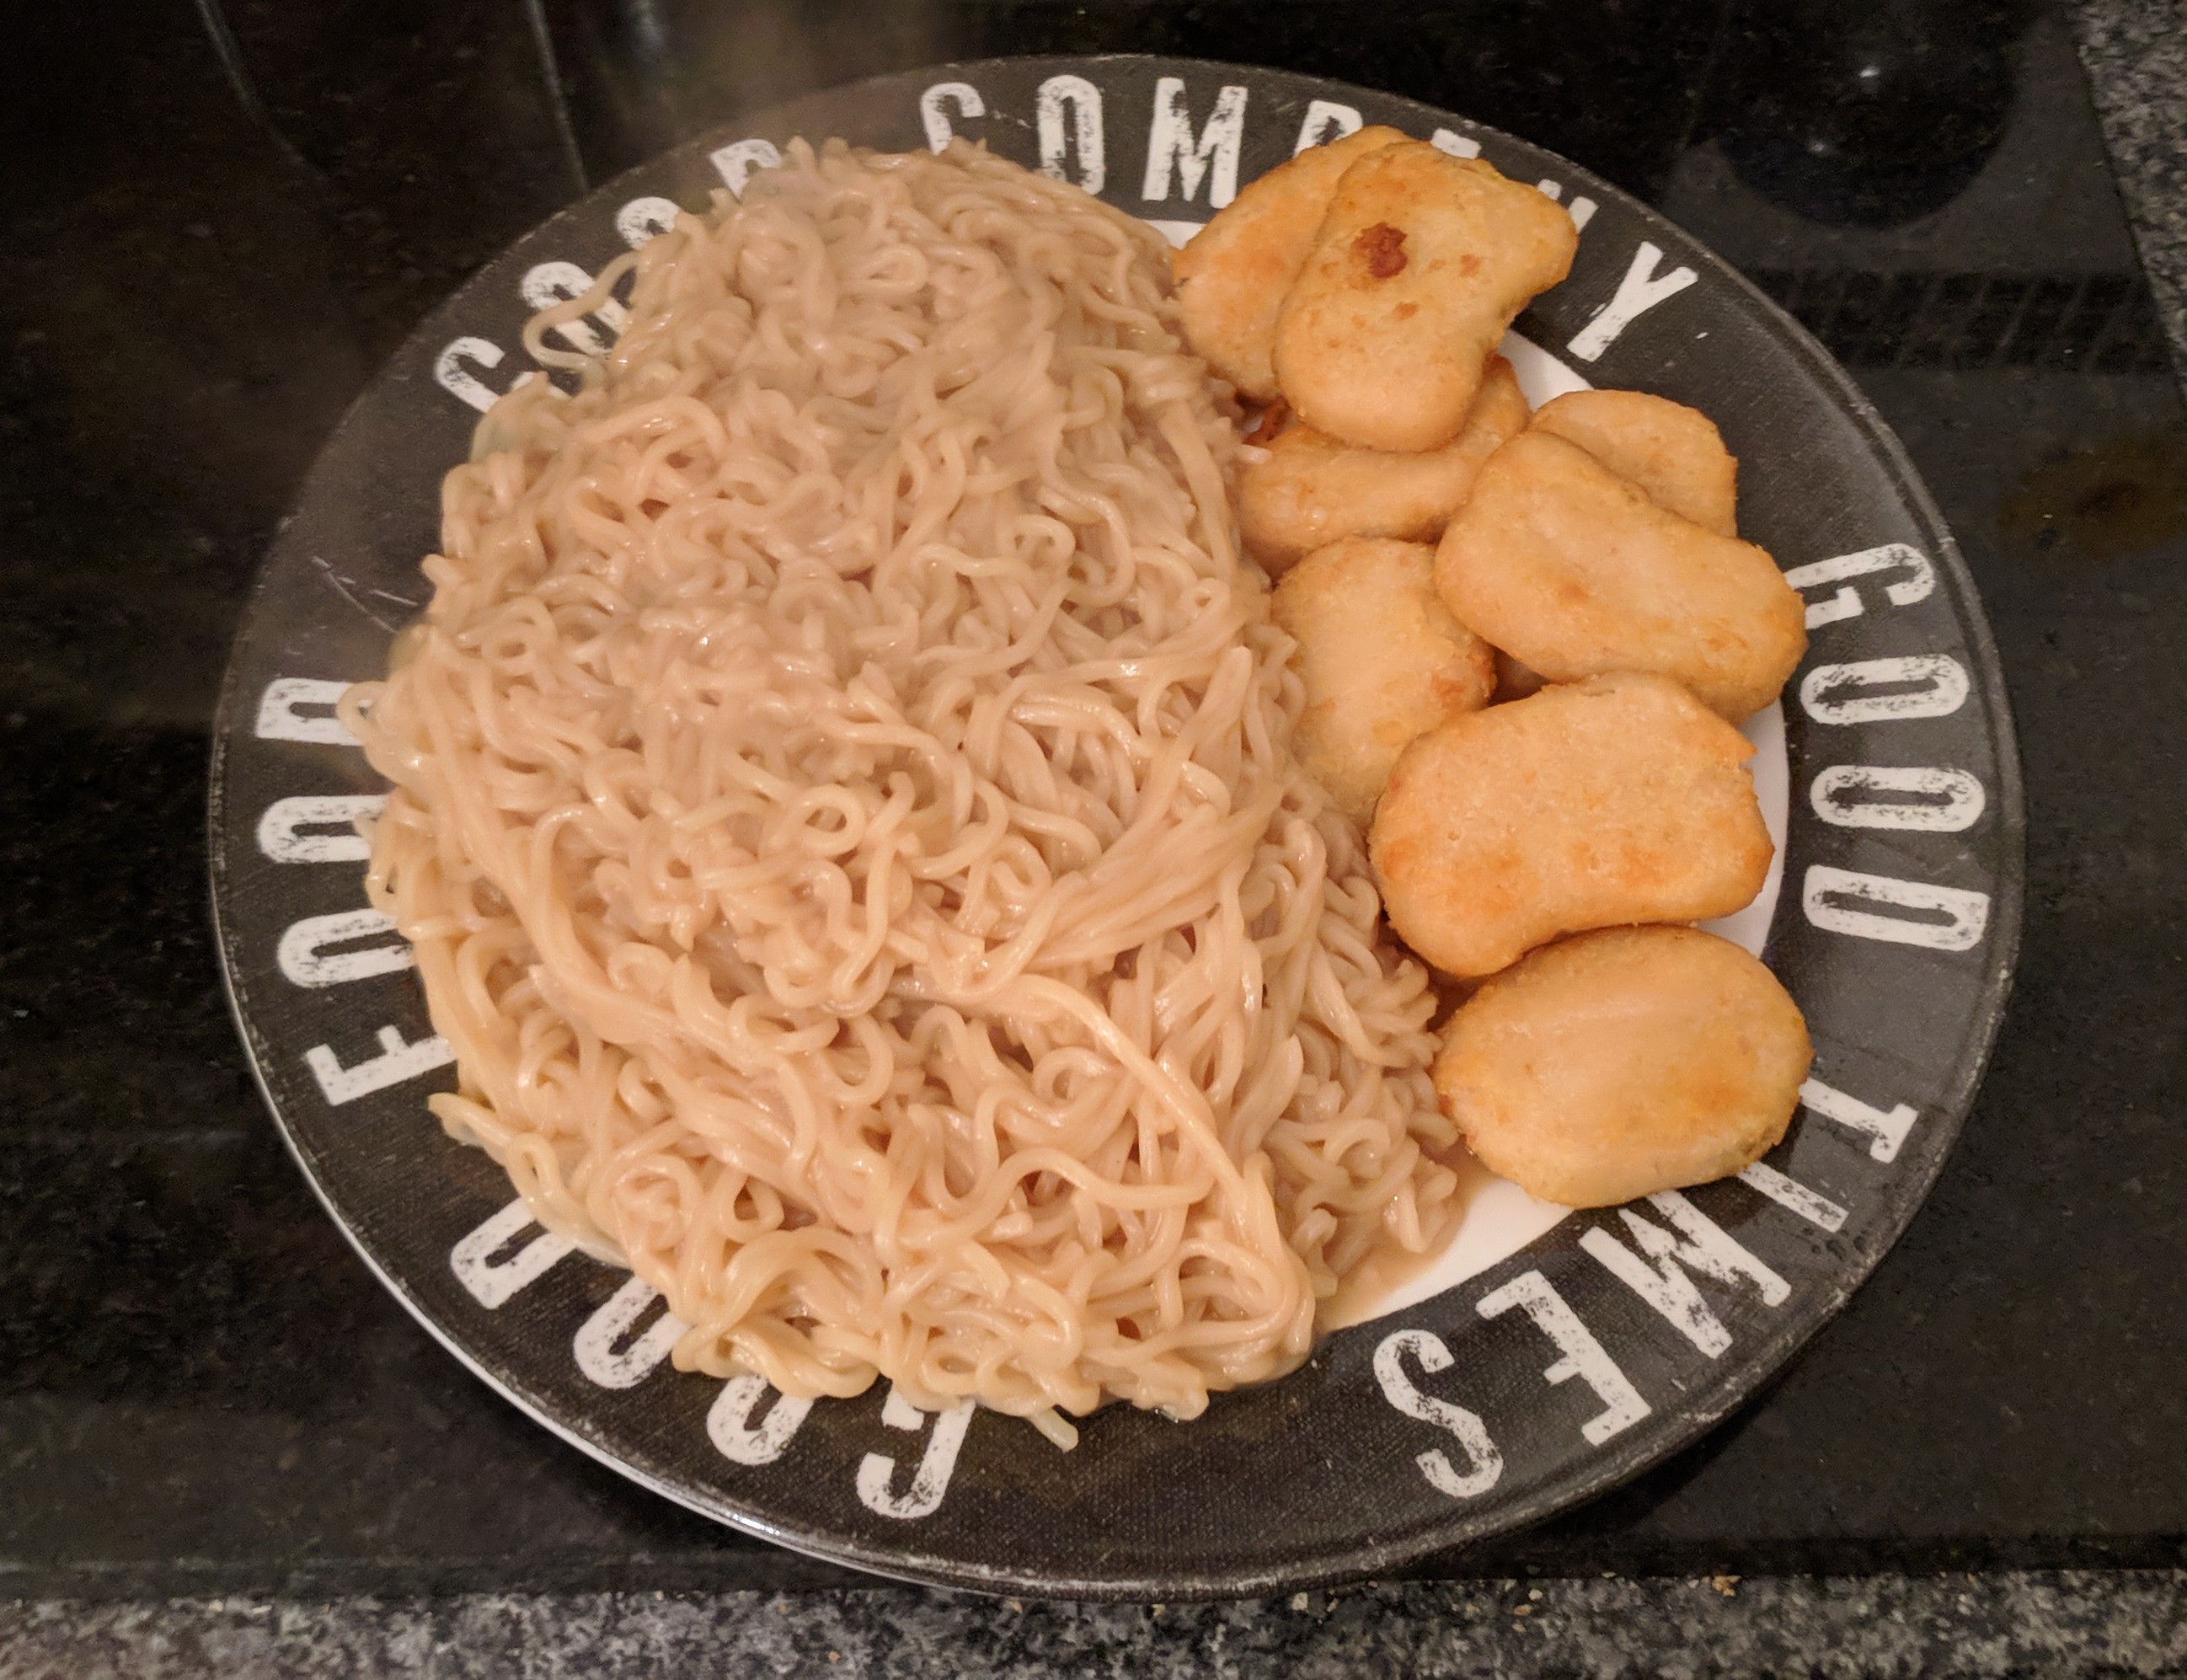 Quorn nuggets and noodles